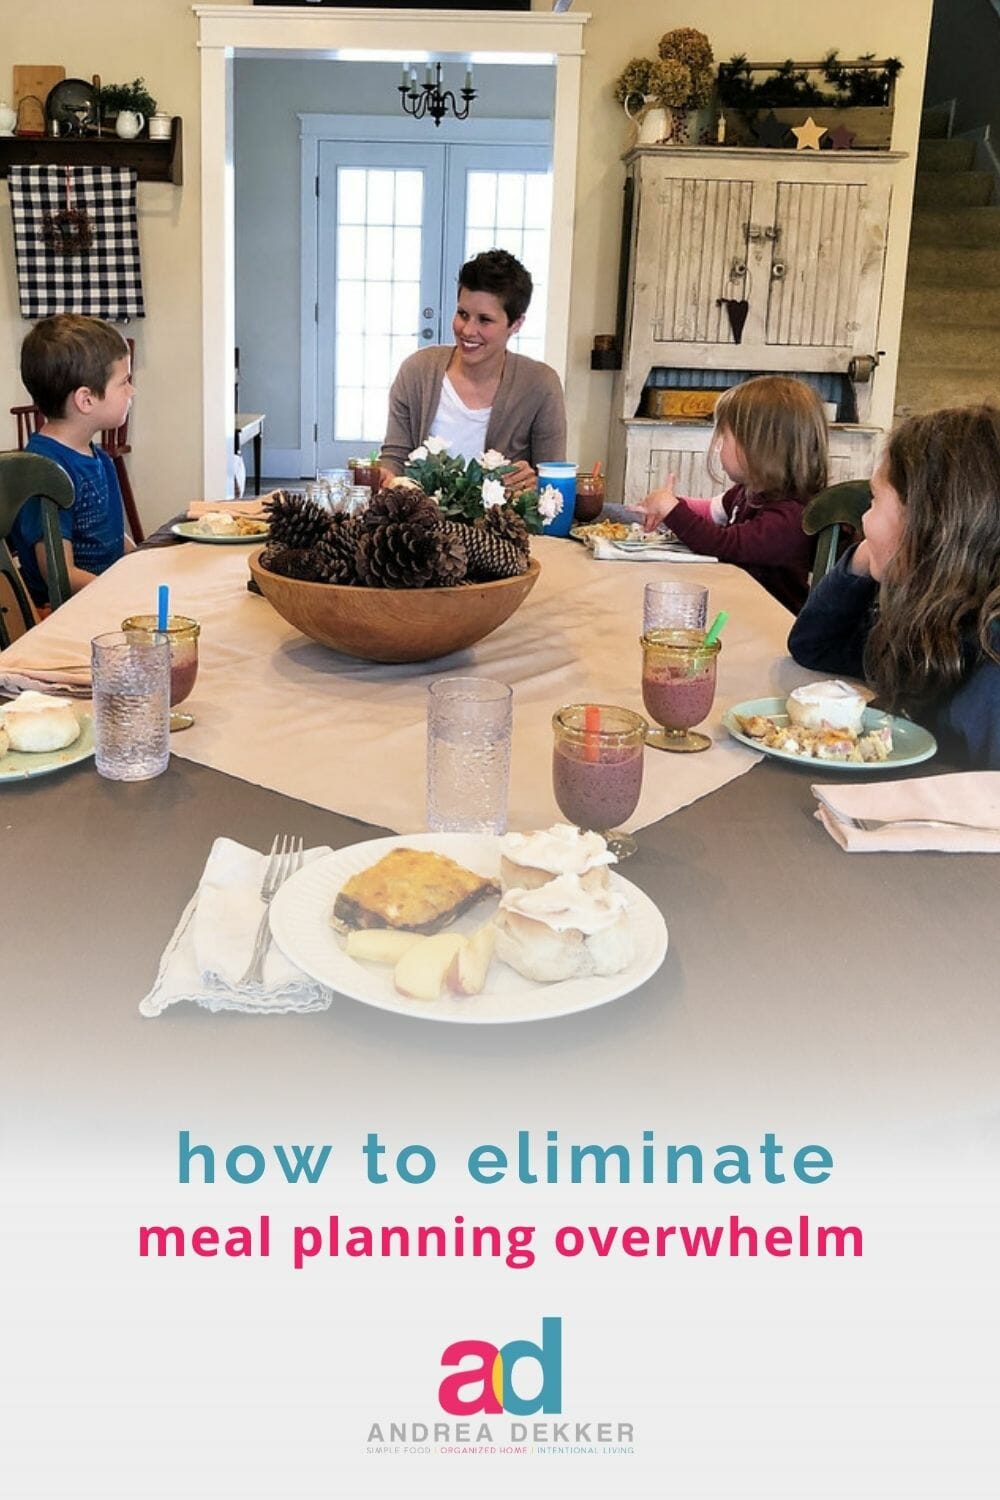 These 3 simple tips will help to eliminate meal planning overwhelm and allow you to enjoy family meal time once again! via @andreadekker